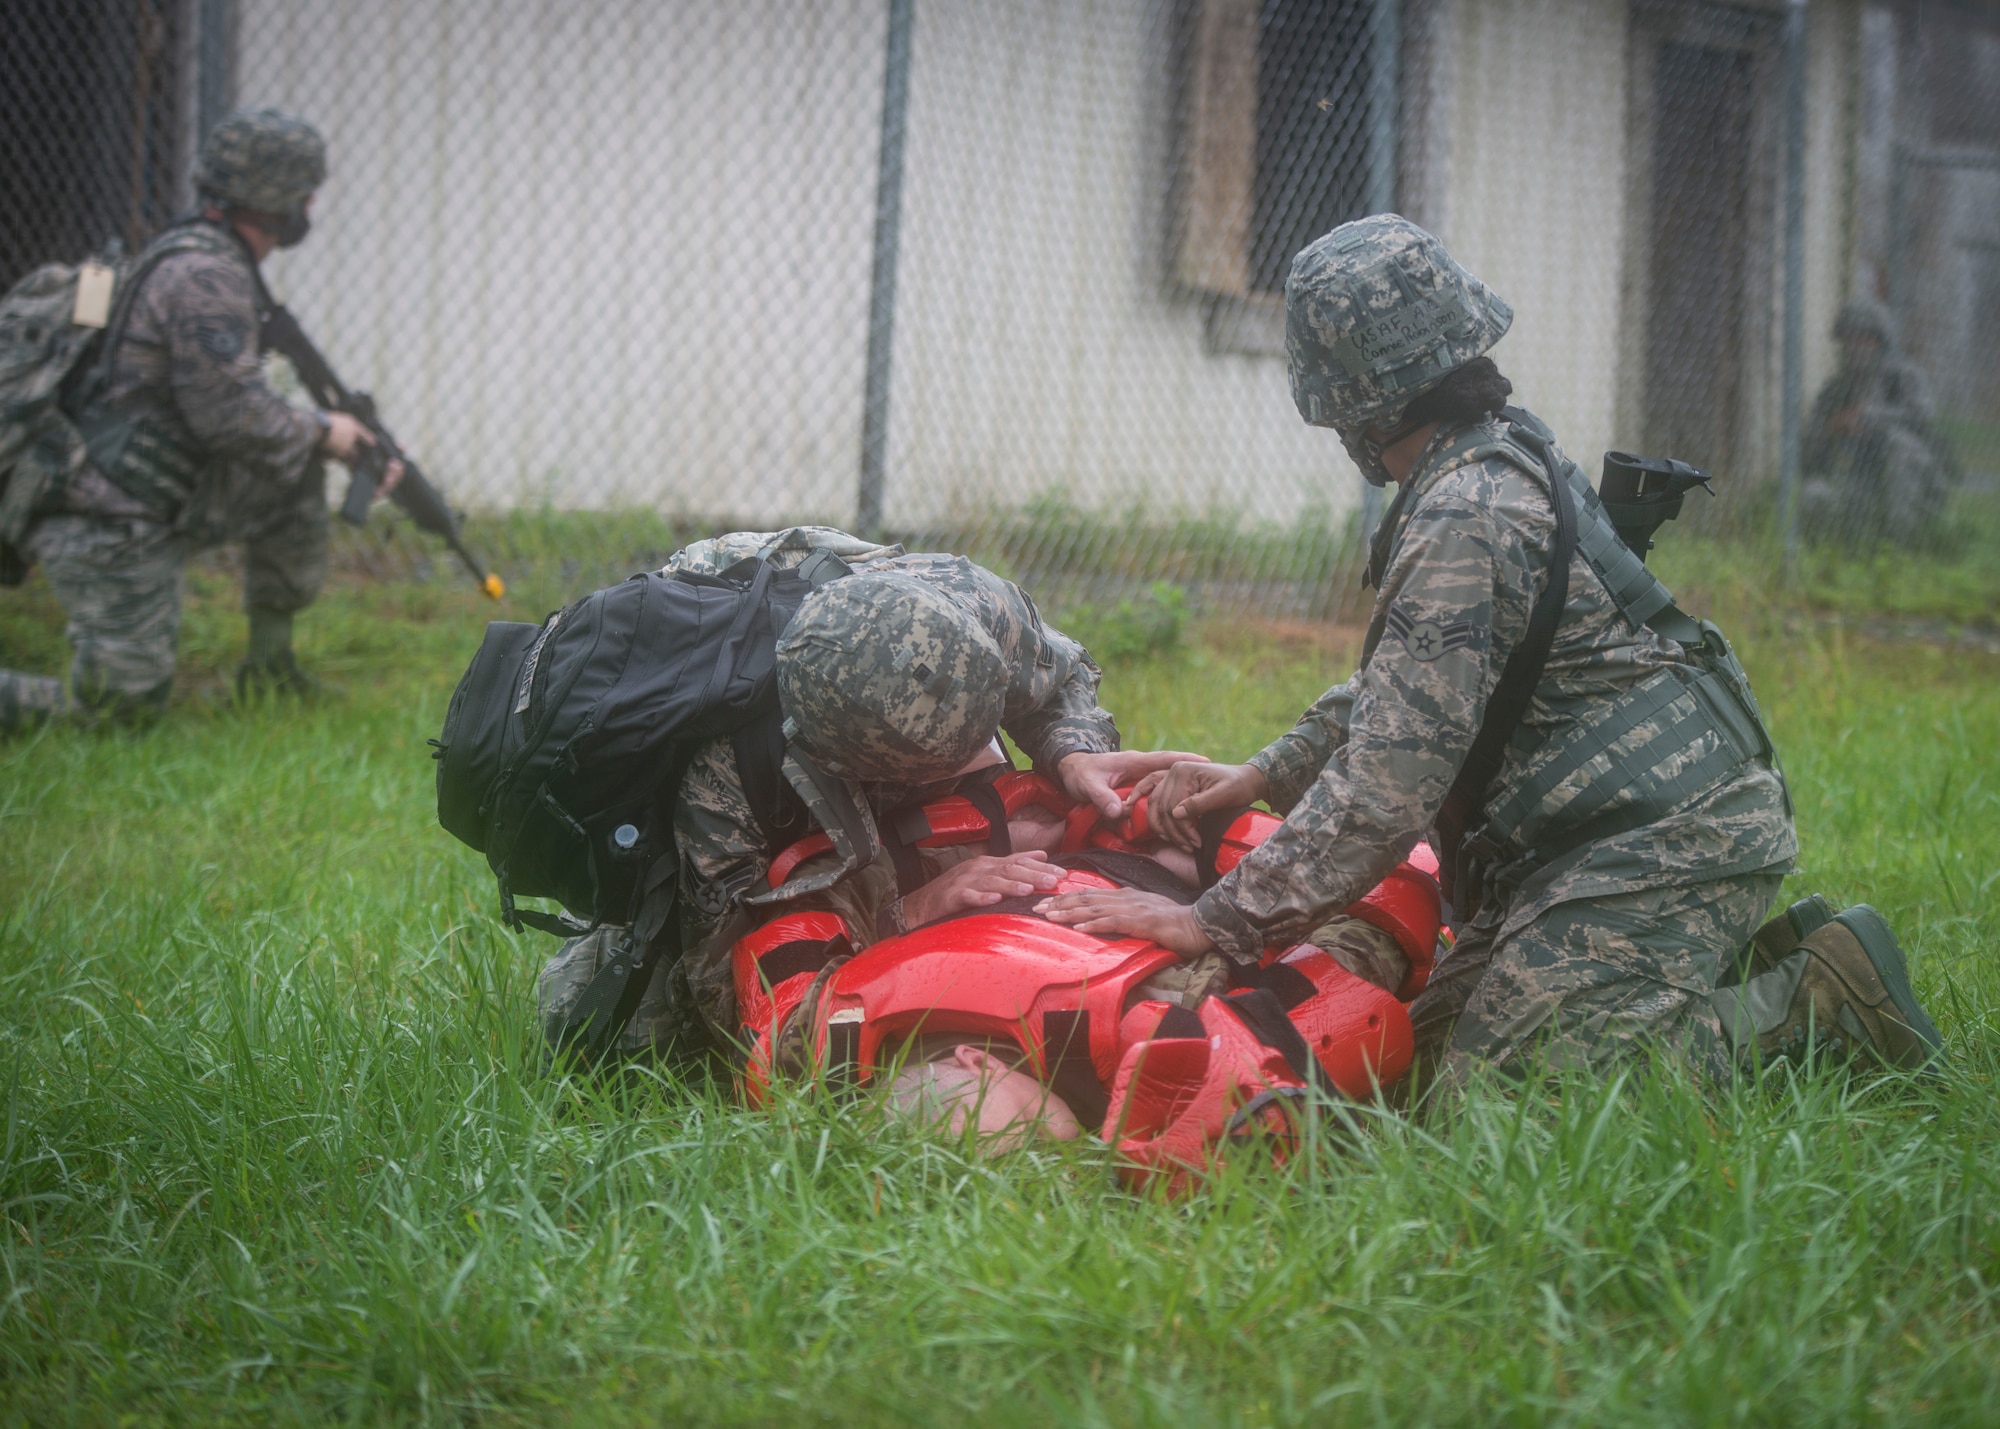 Airman 1st Class Connie Robinson (right), 103rd Civil Engineer Squadron, helps apprehend a simulated adversary during expeditionary operations training at Stones Ranch Military Reservation in East Lyme, Connecticut, Sept. 10, 2020. Members of the 103rd Civil Engineer Squadron, 103rd Security Forces Squadron, 103rd Logistics Readiness Squadron, and 103rd Medical Group combined their expertise to conduct this key readiness training while protecting the health of participants. (U.S. Air National Guard photo by Staff Sgt. Steven Tucker)